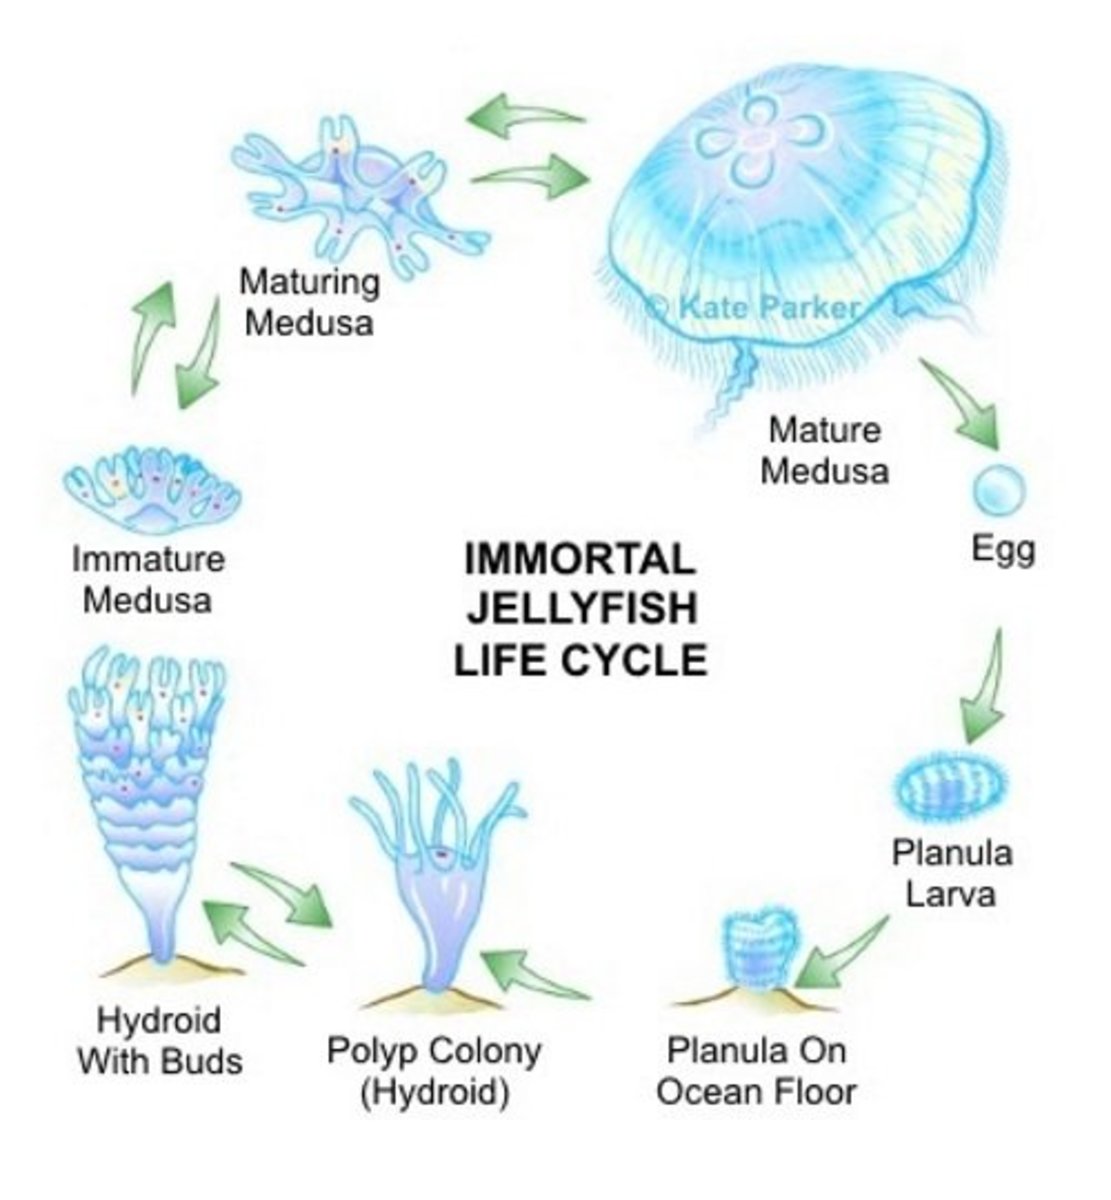 Immortal jellyfishes (Turritopsis dohrnii) have the amazing ability to revert back to the polyp stage anywhere in their medusa stages of development.